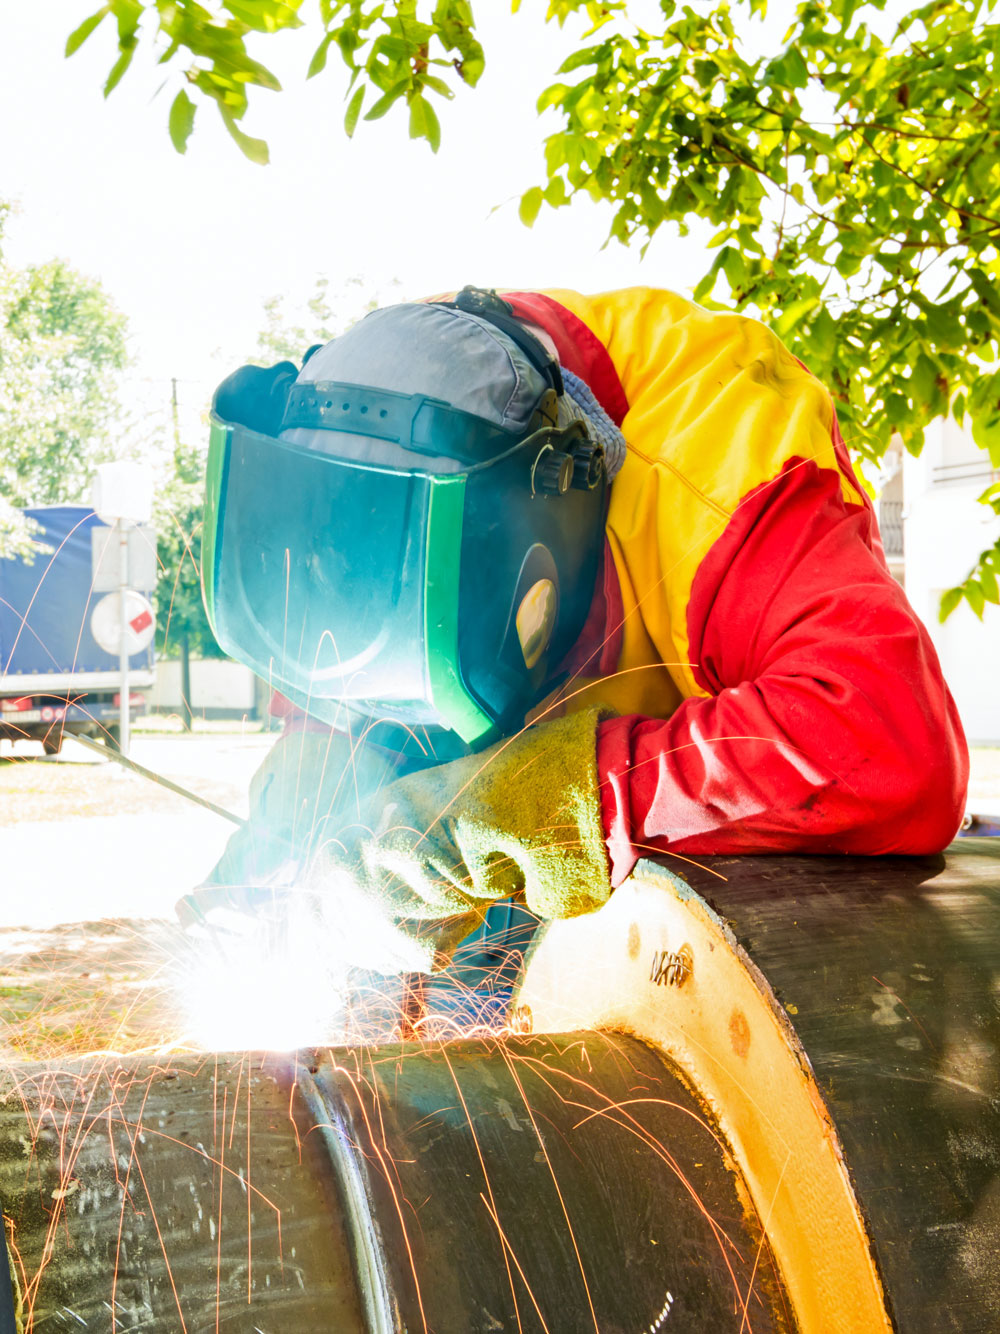 A Protege employee performing welding work